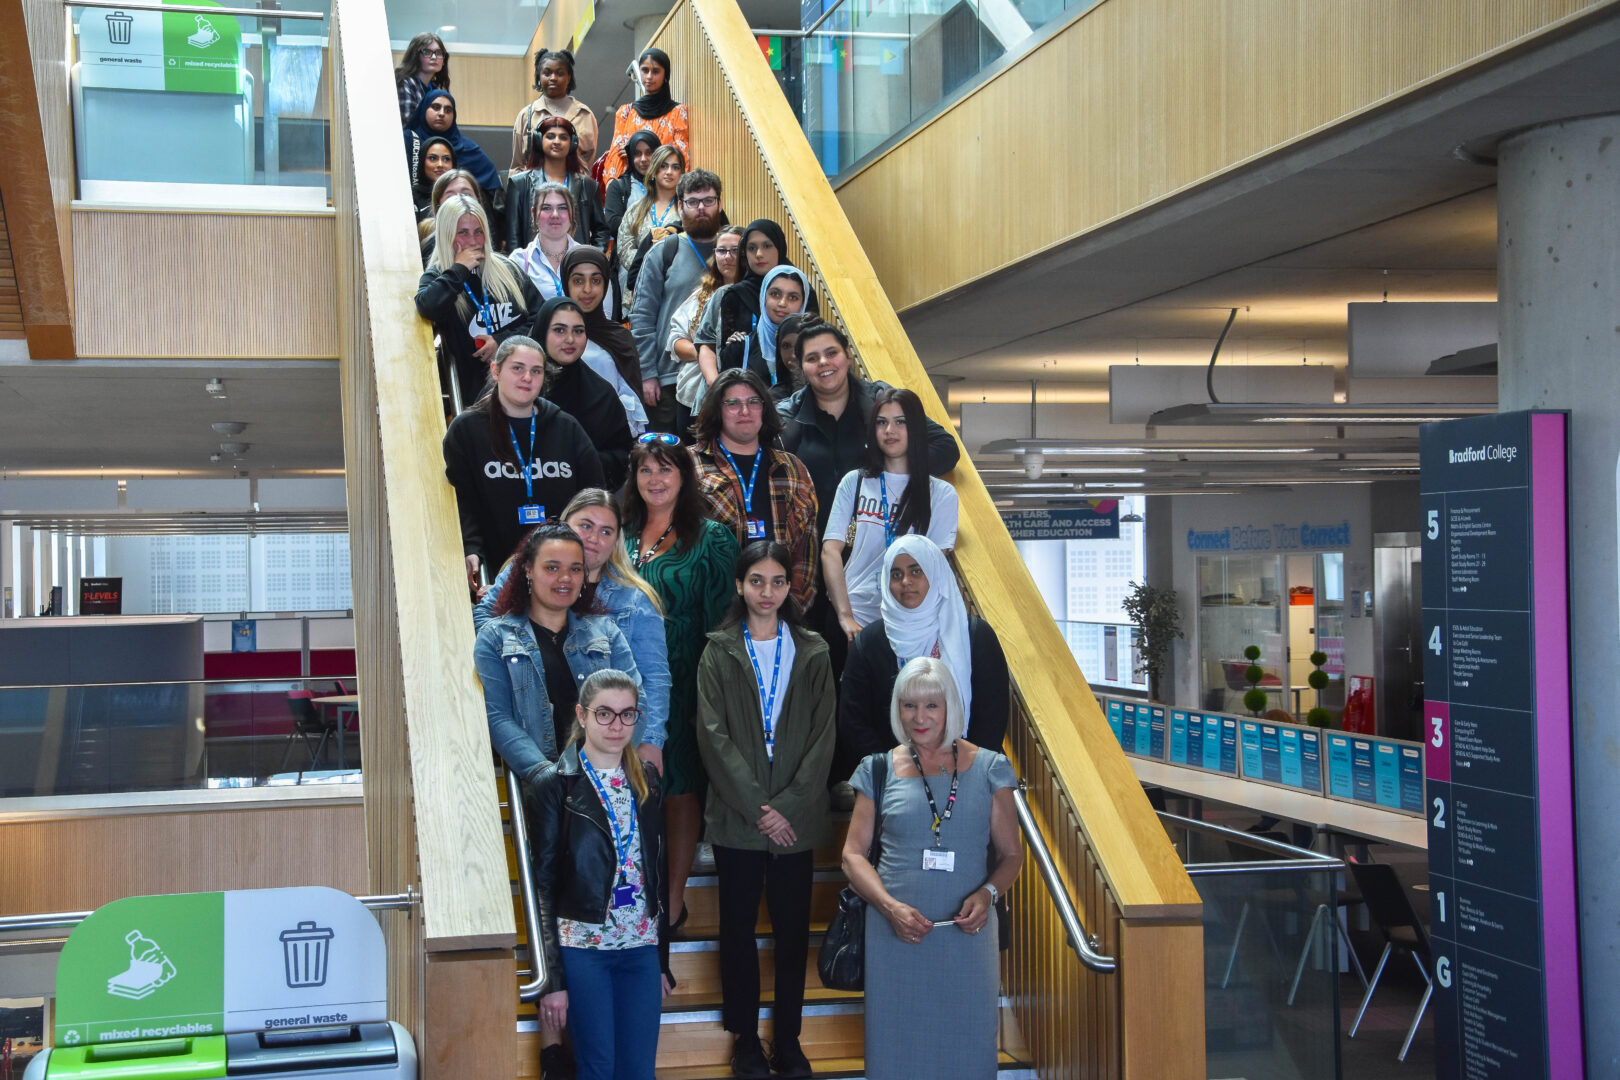 80 Fast Track to T Level Health students lined up on a staircase after completing work experience in the nhs